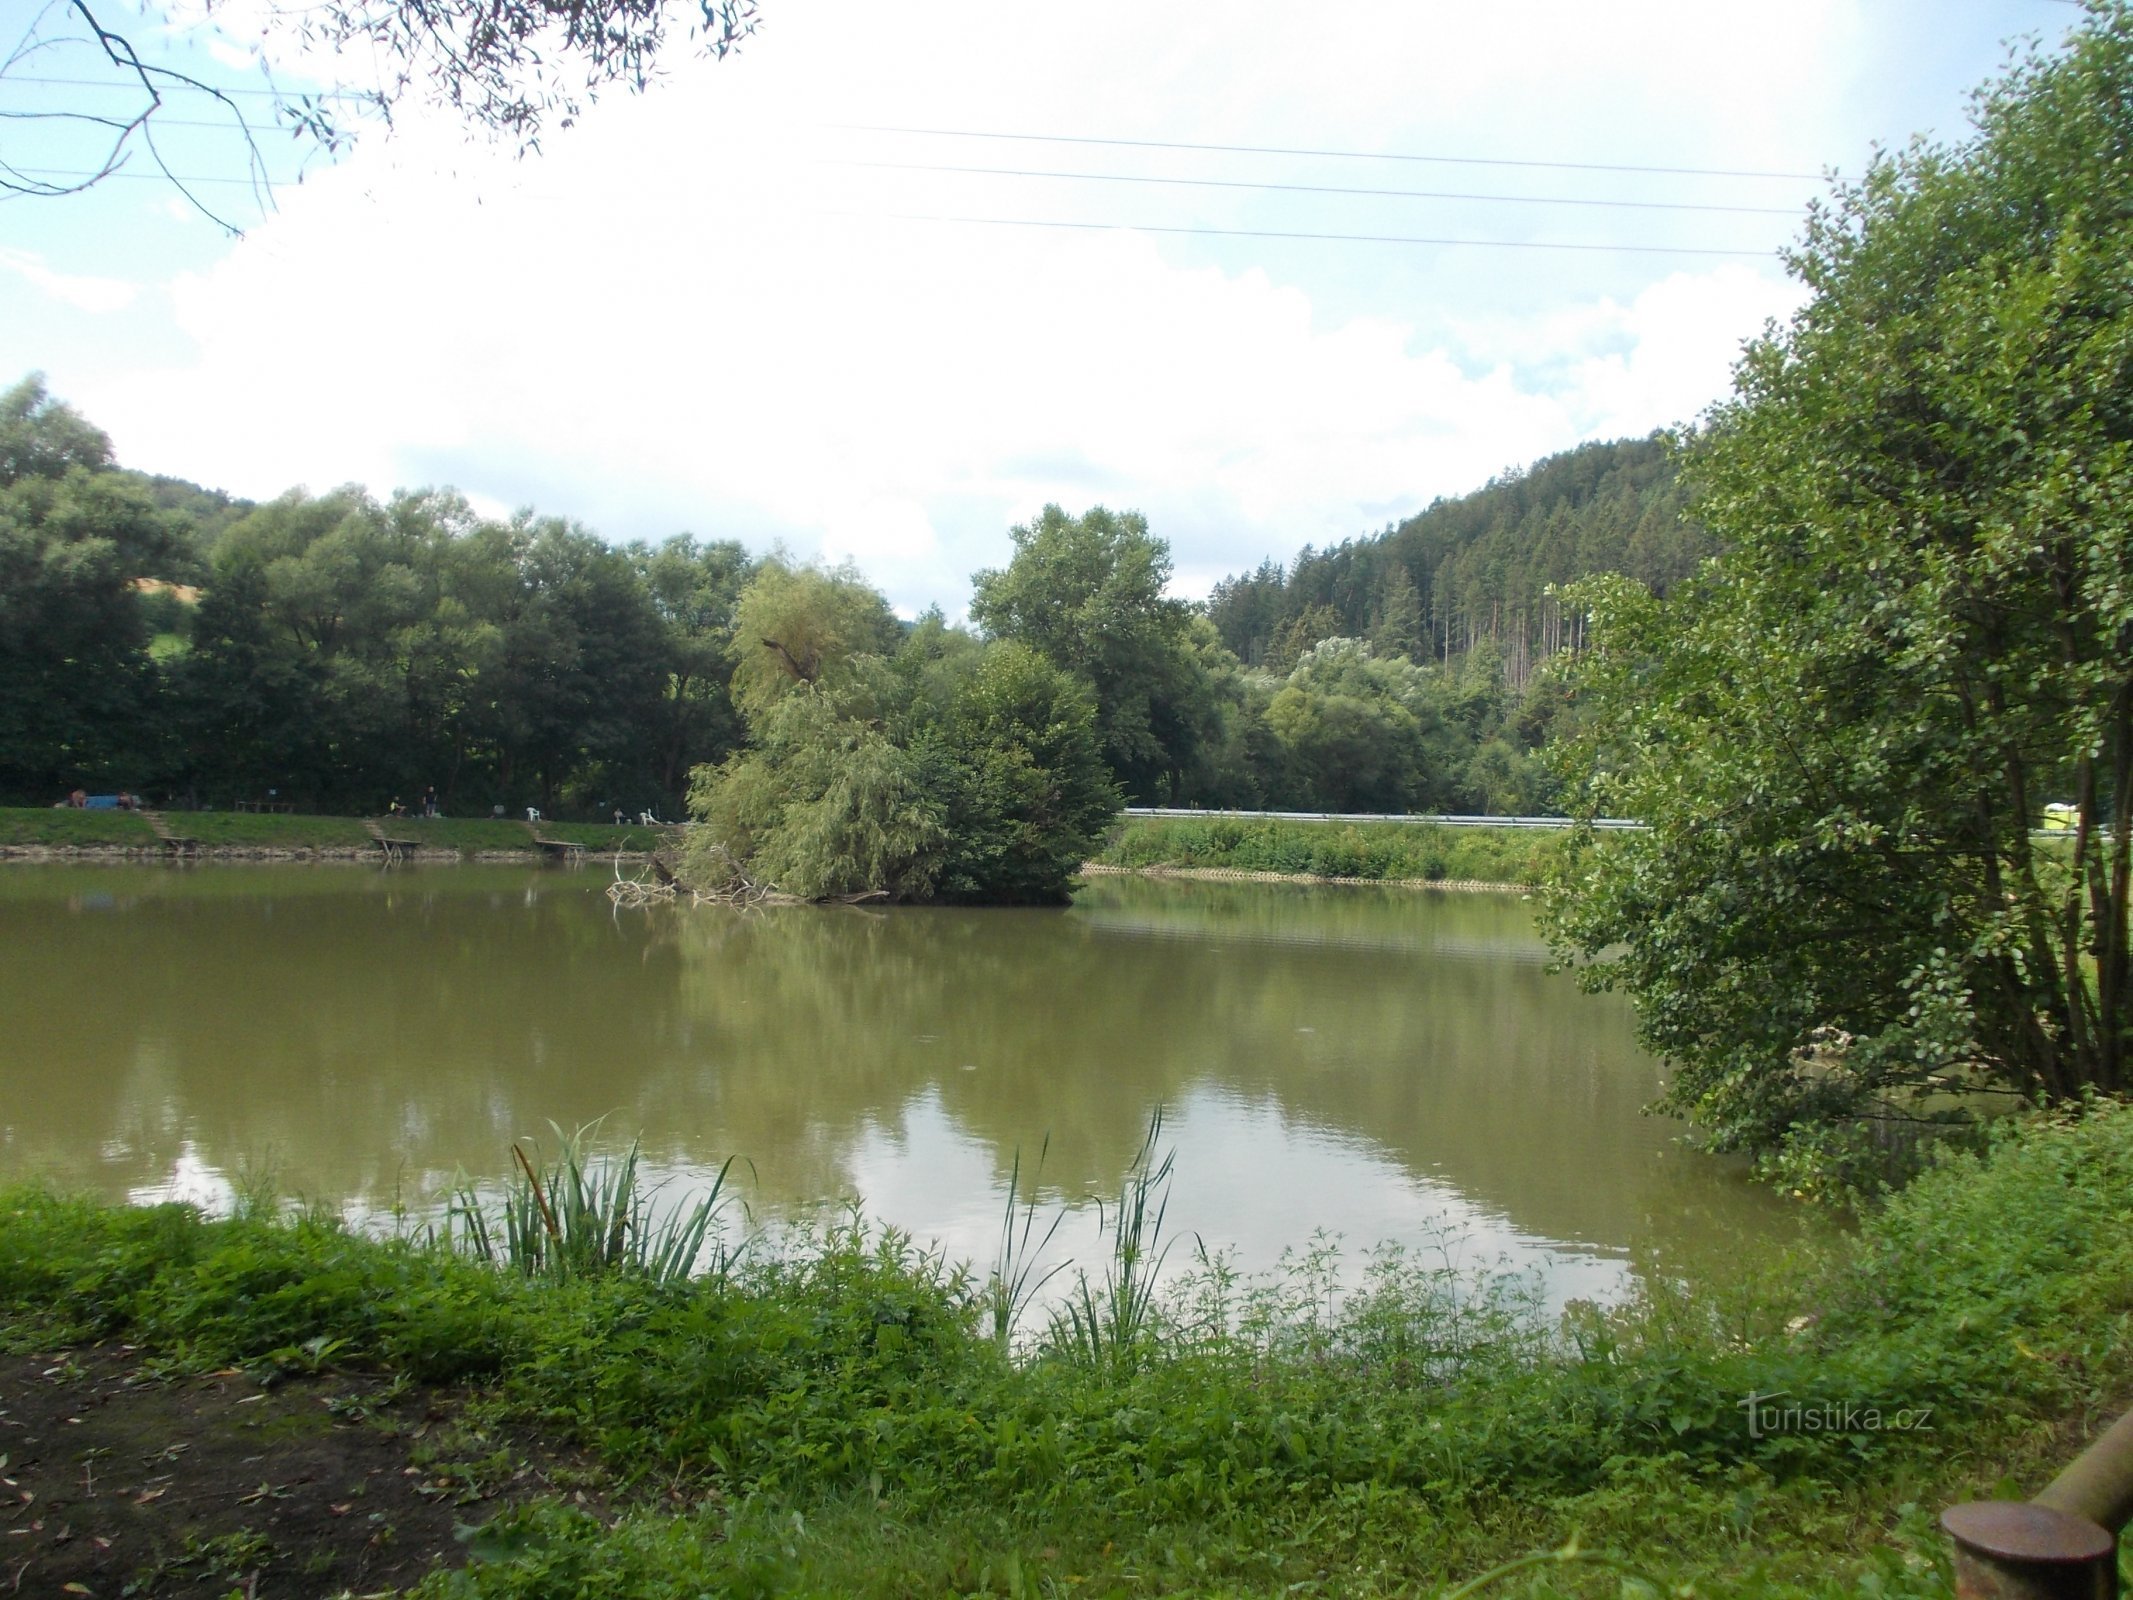 one of the ponds